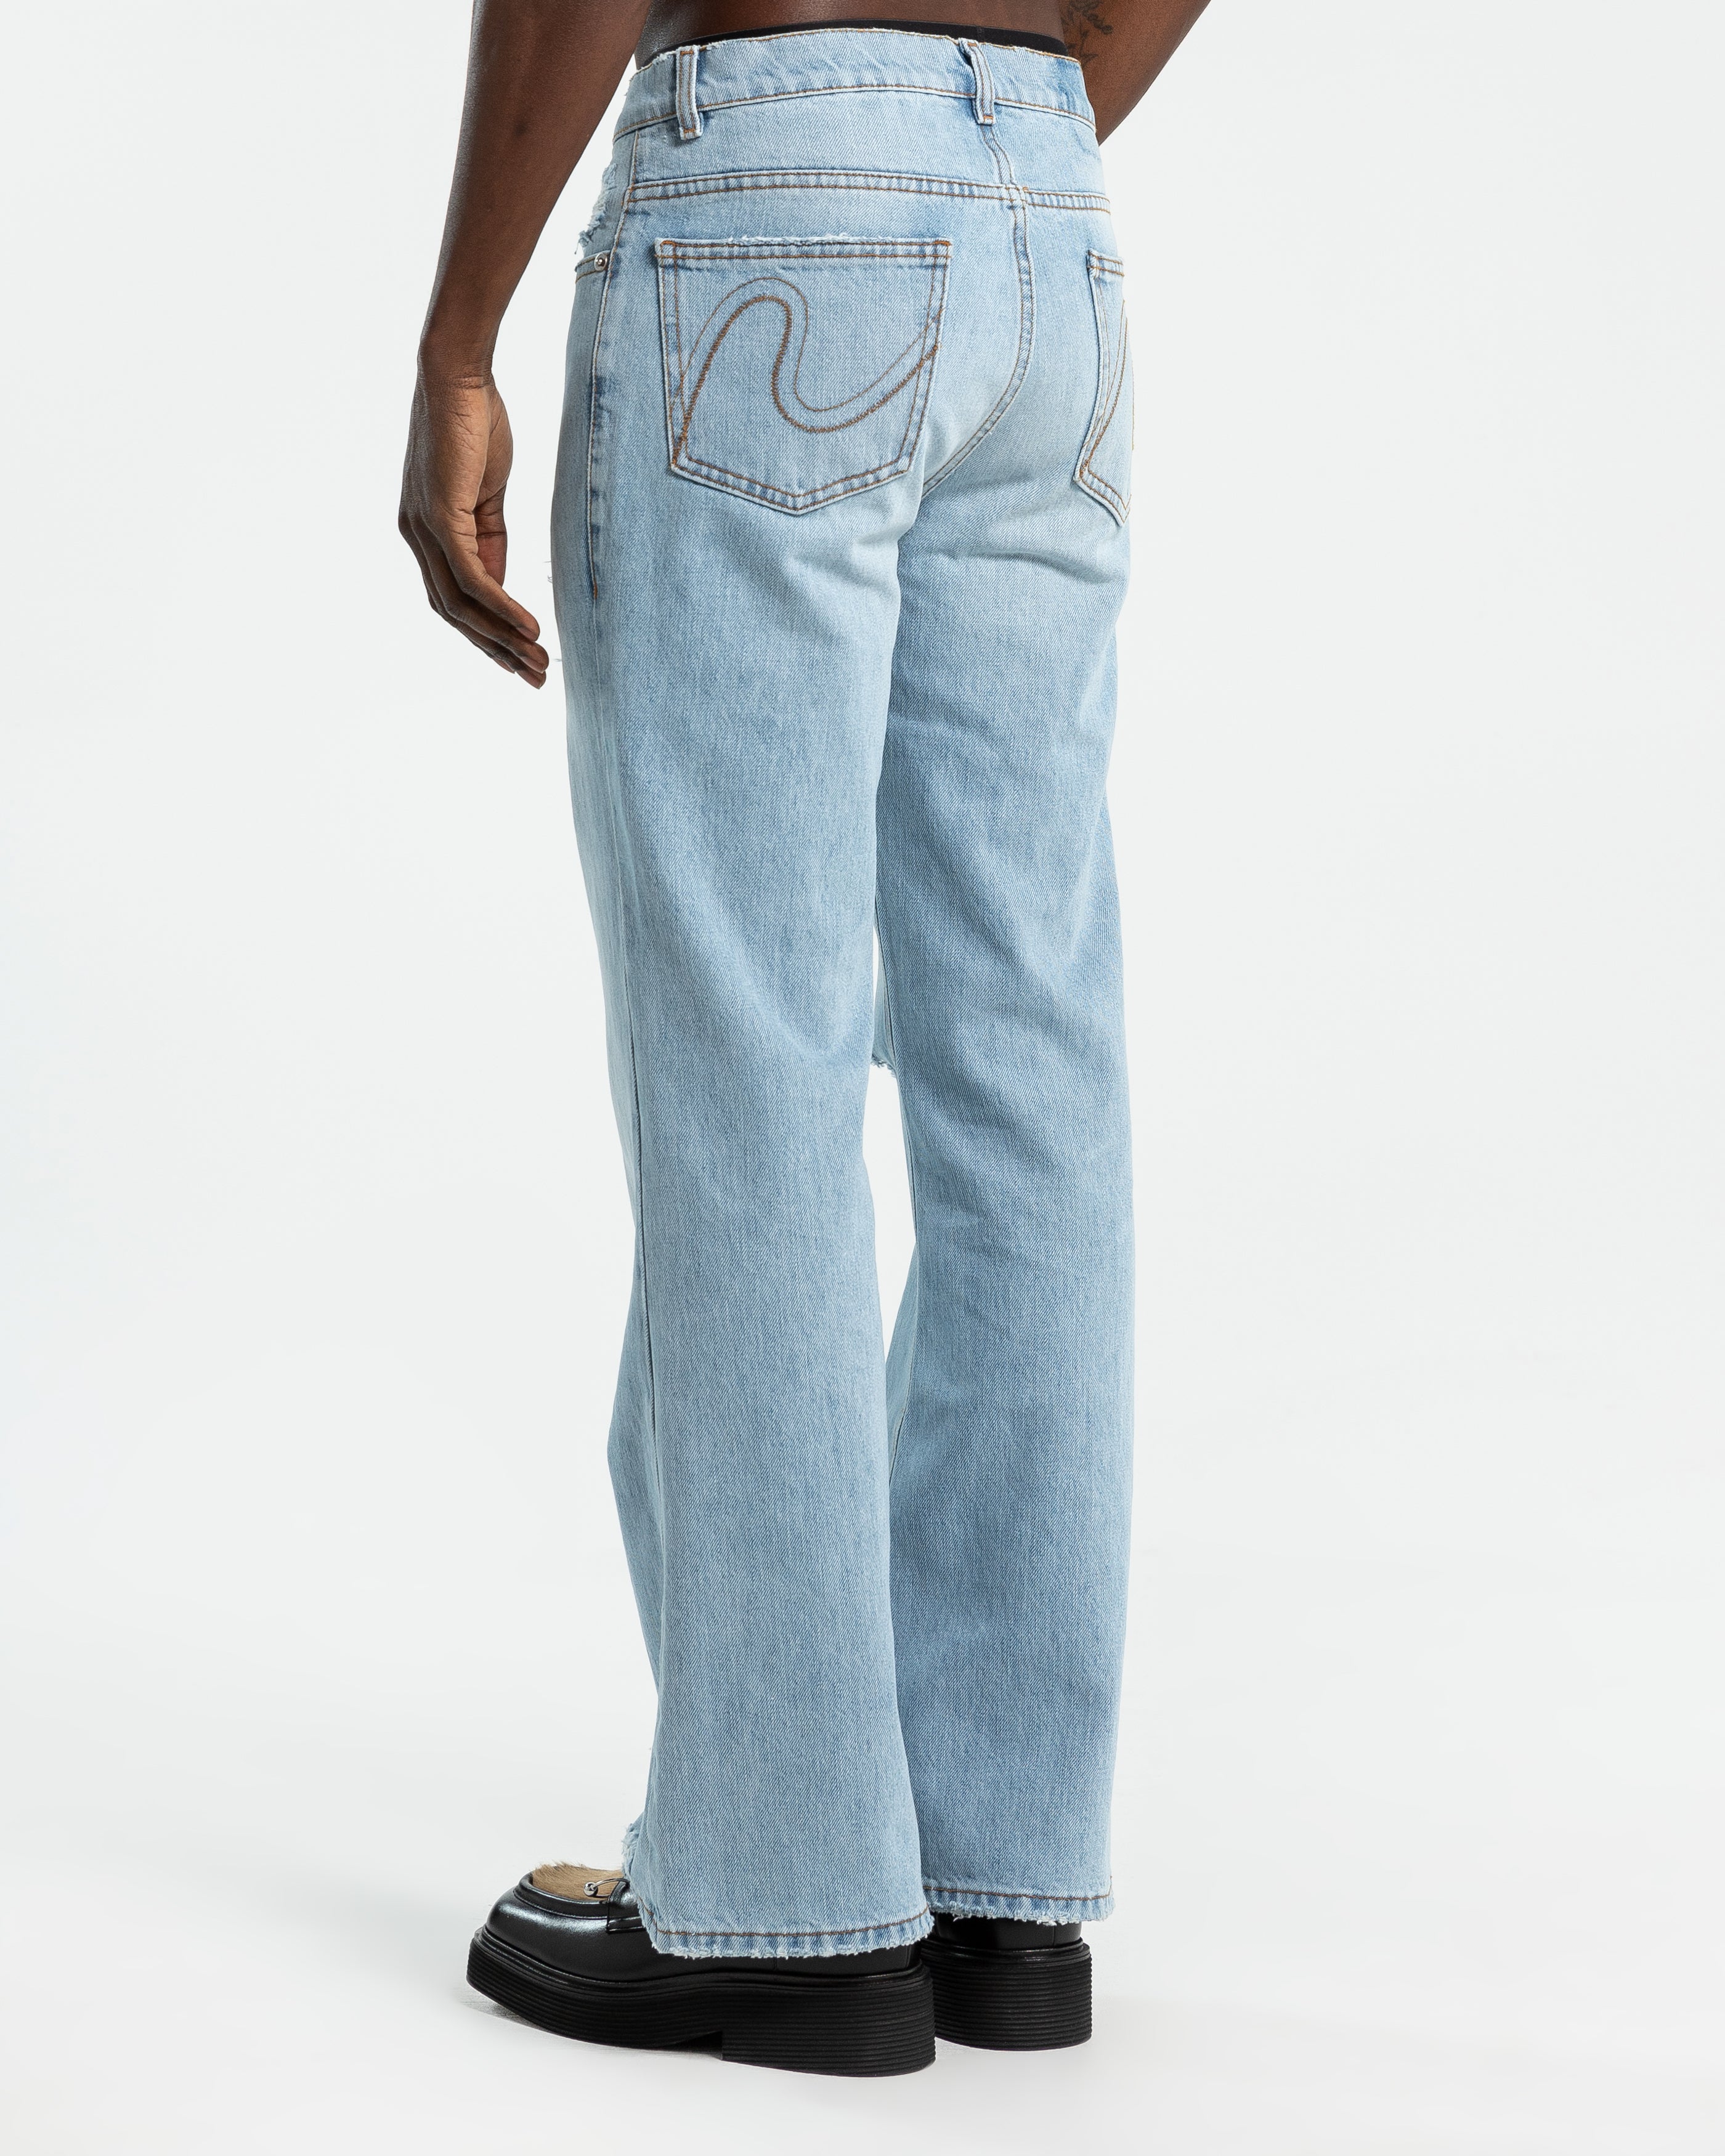 Marques'Almeida Feather-trimmed Denim Flared Jeans in Blue